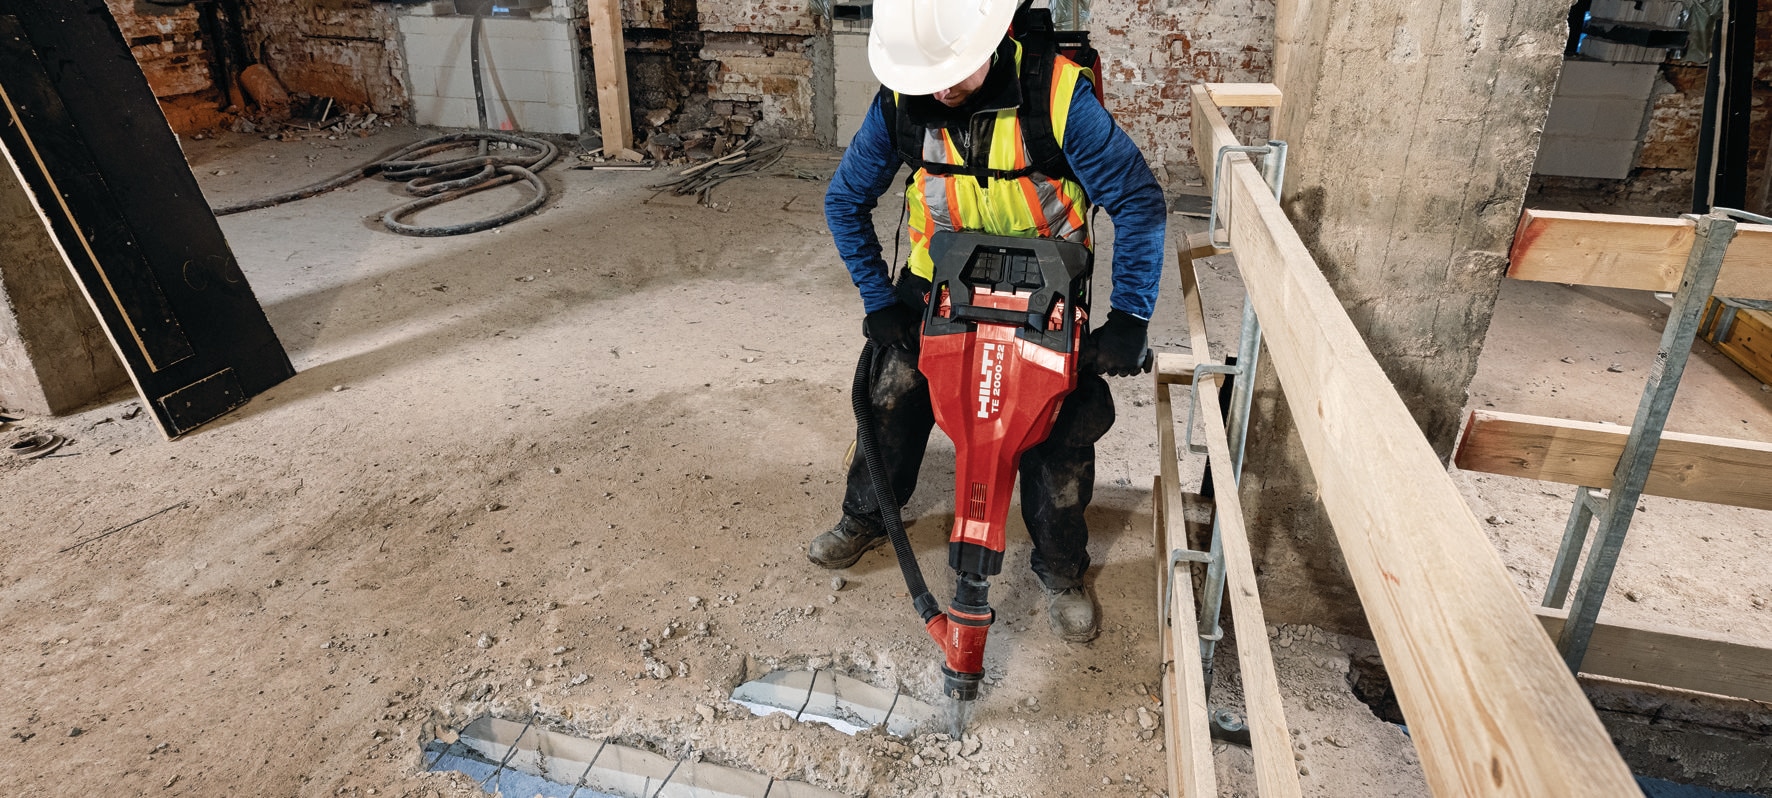 TE 2000-22 Cordless jackhammer - Demolition hammers and breakers 